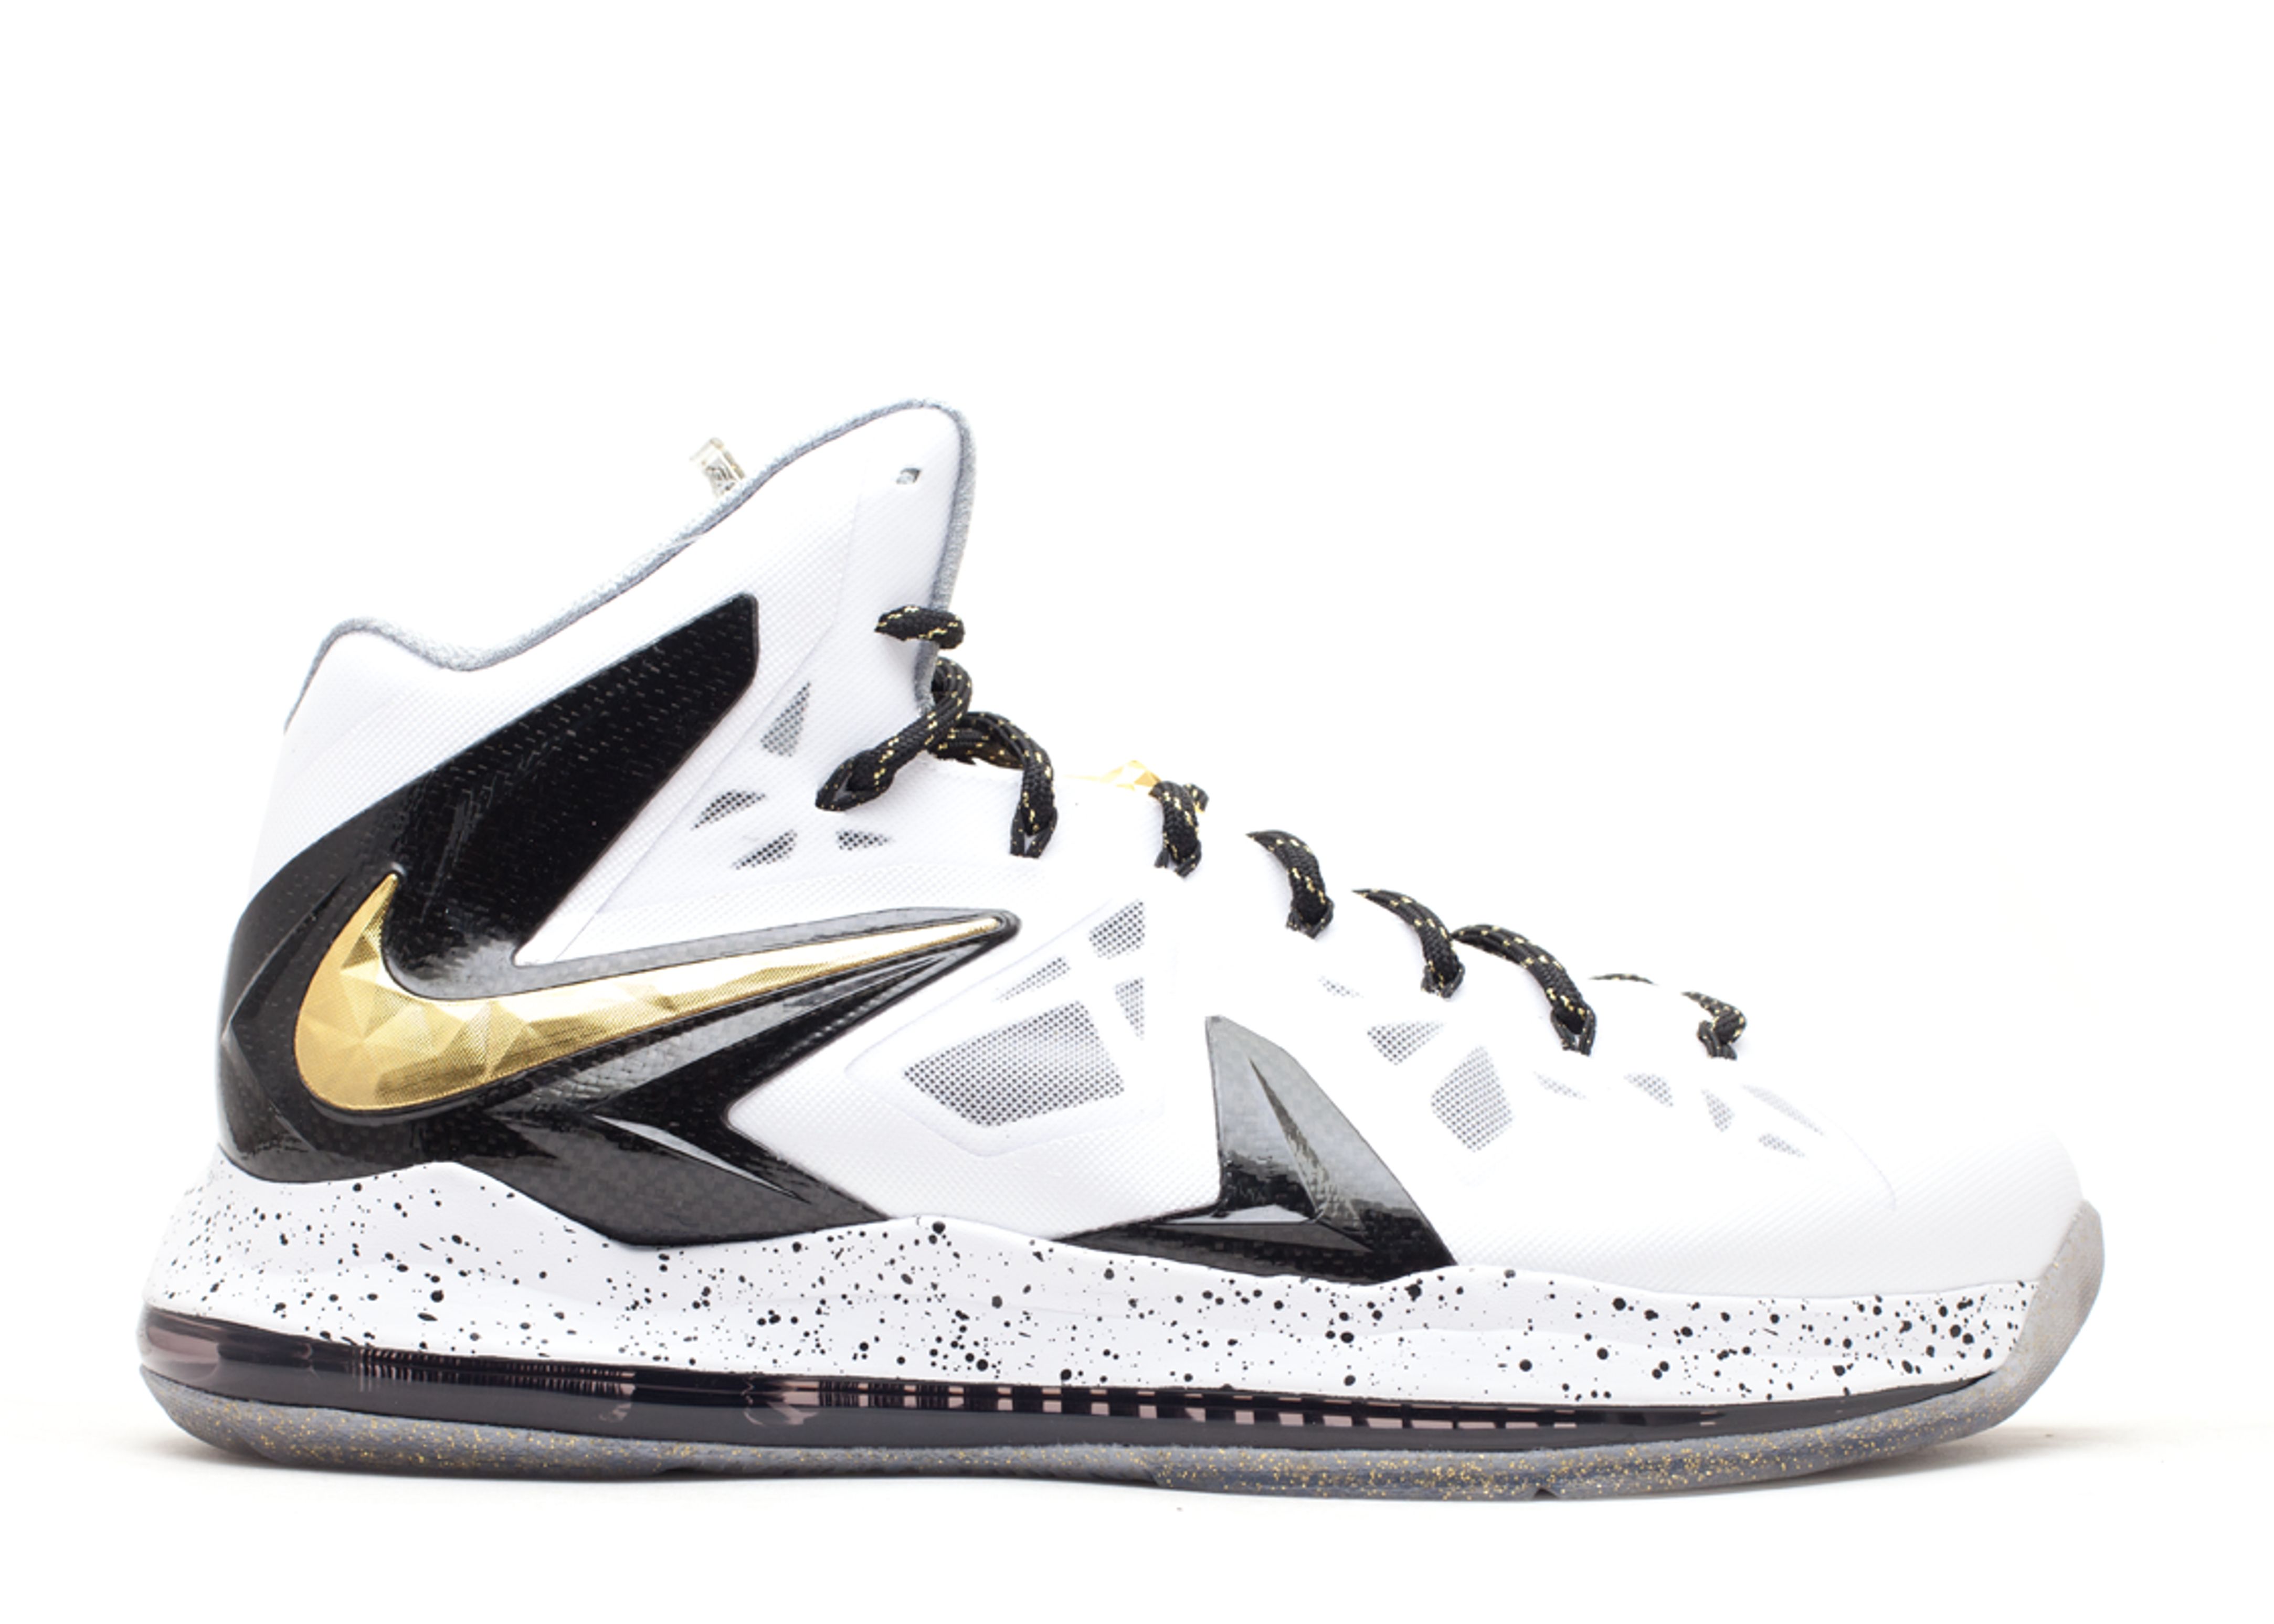 white and gold lebrons